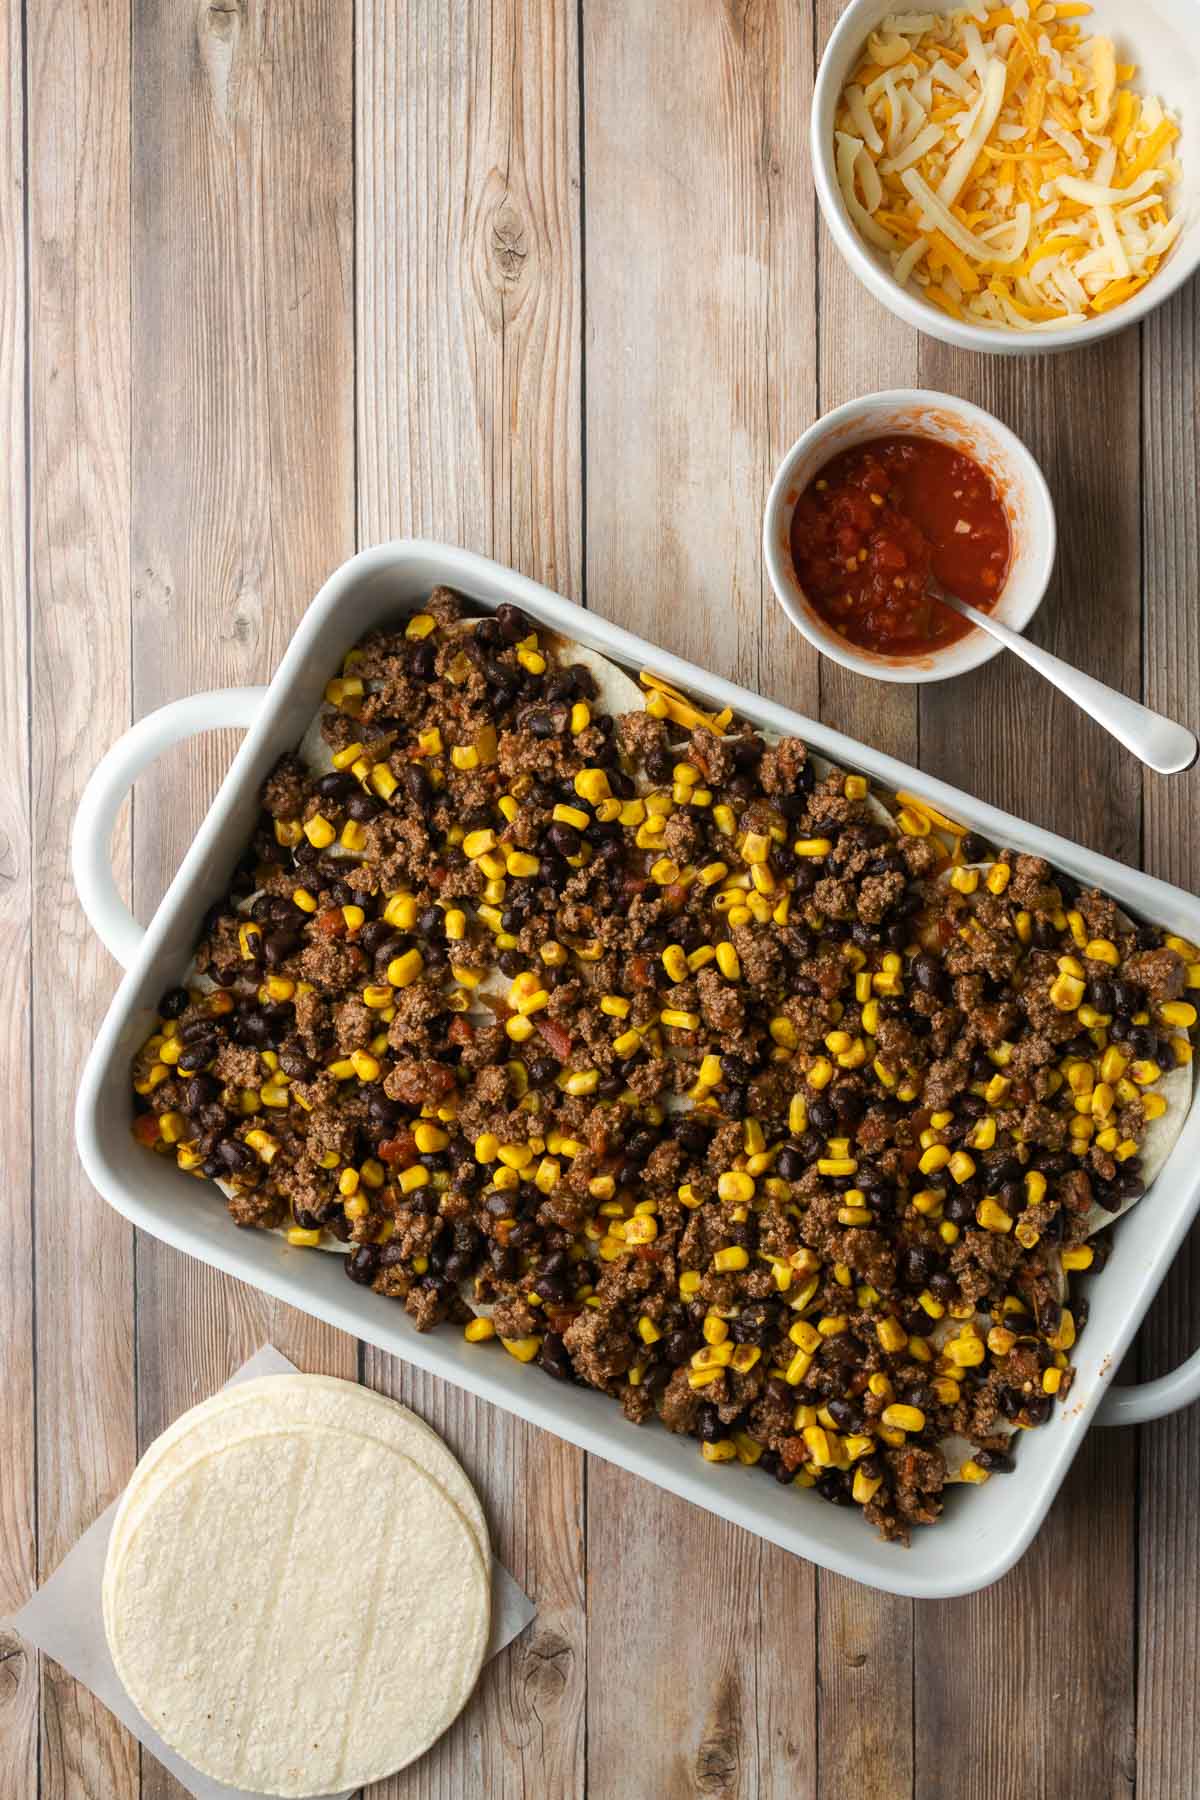 Casserole dish with layers of ground beef, salsa, tortillas, and cheese.